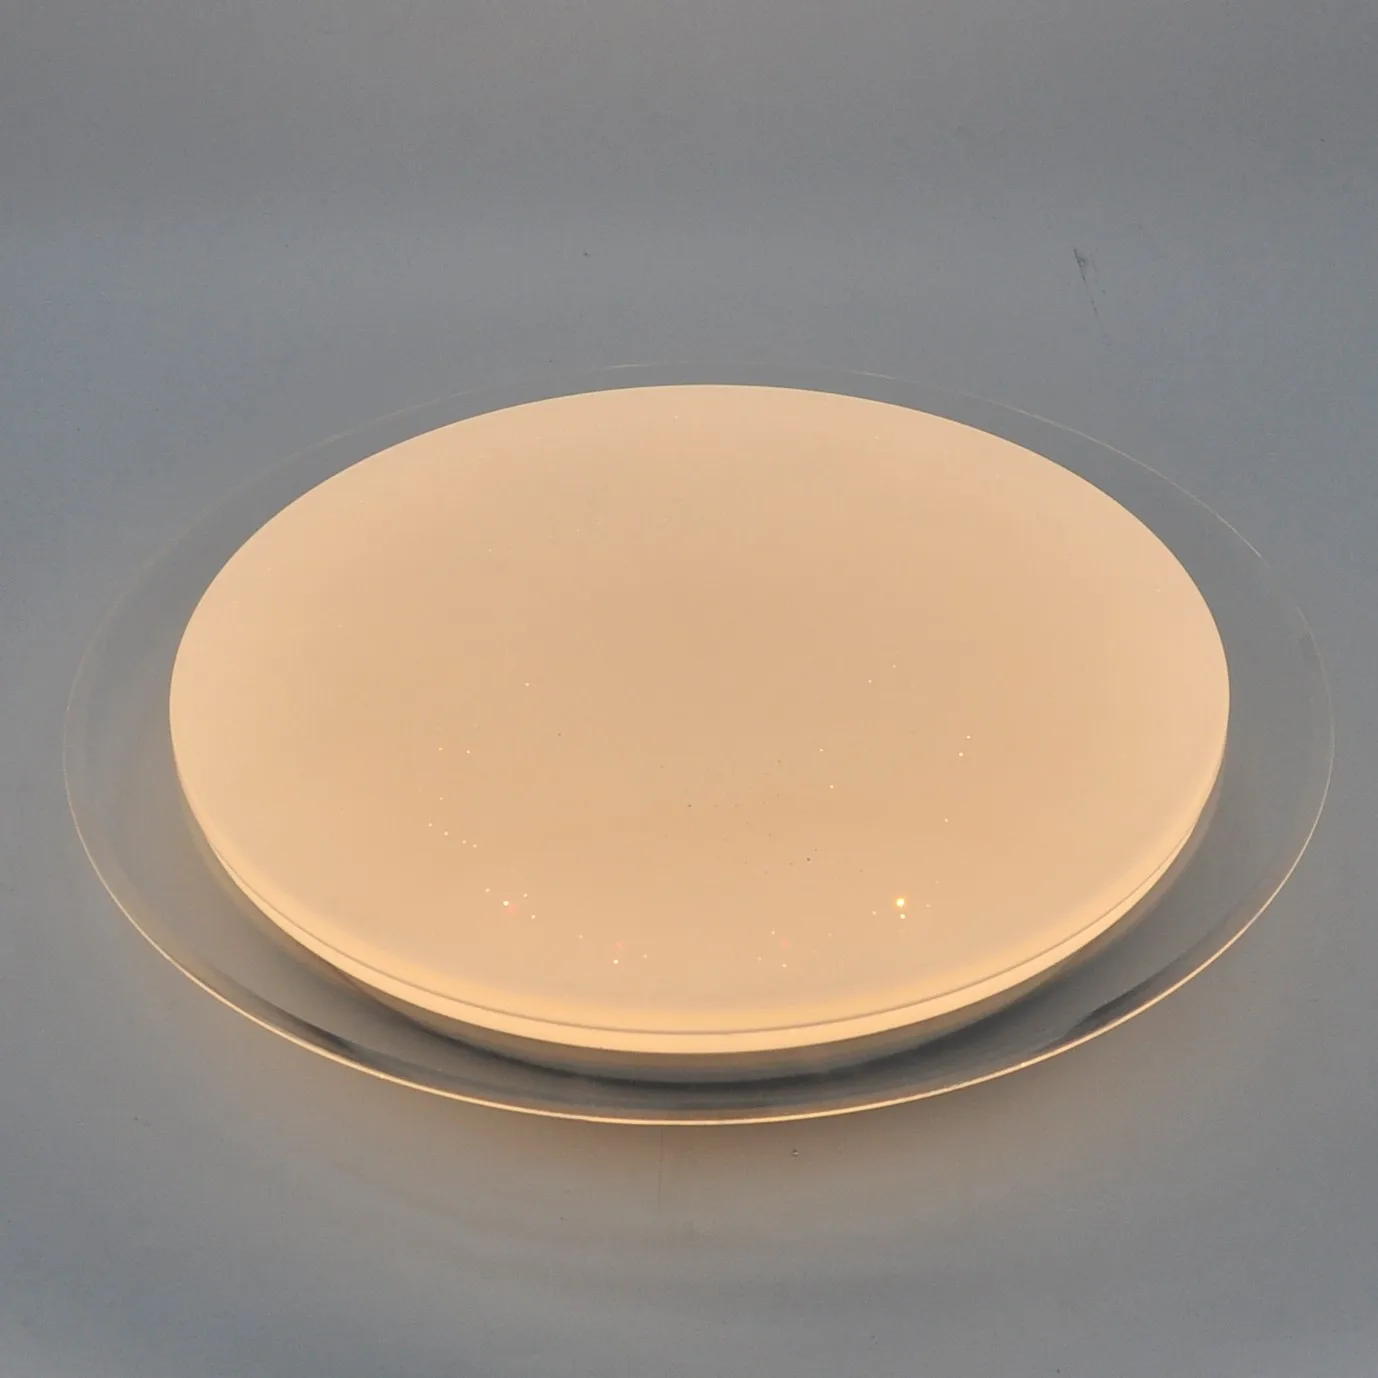 High quality deckenleuchte round plastic kitchen led ceiling light covers